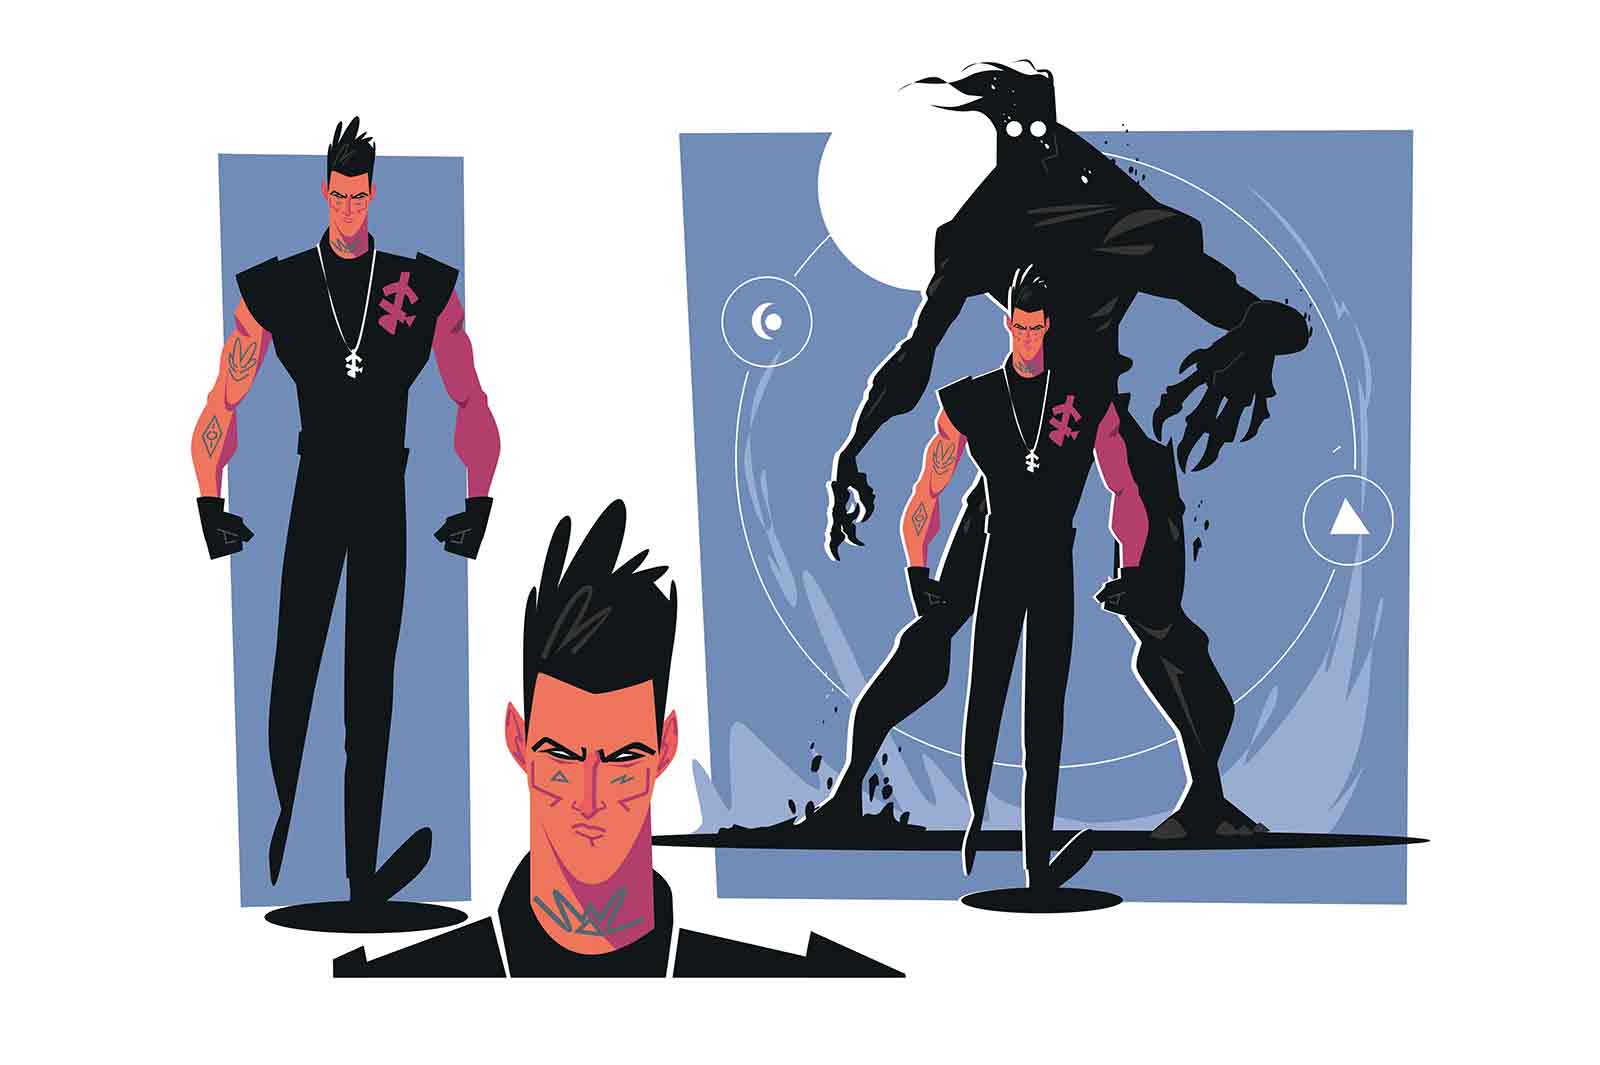 Determined man with daemon behind him, vector illustration.